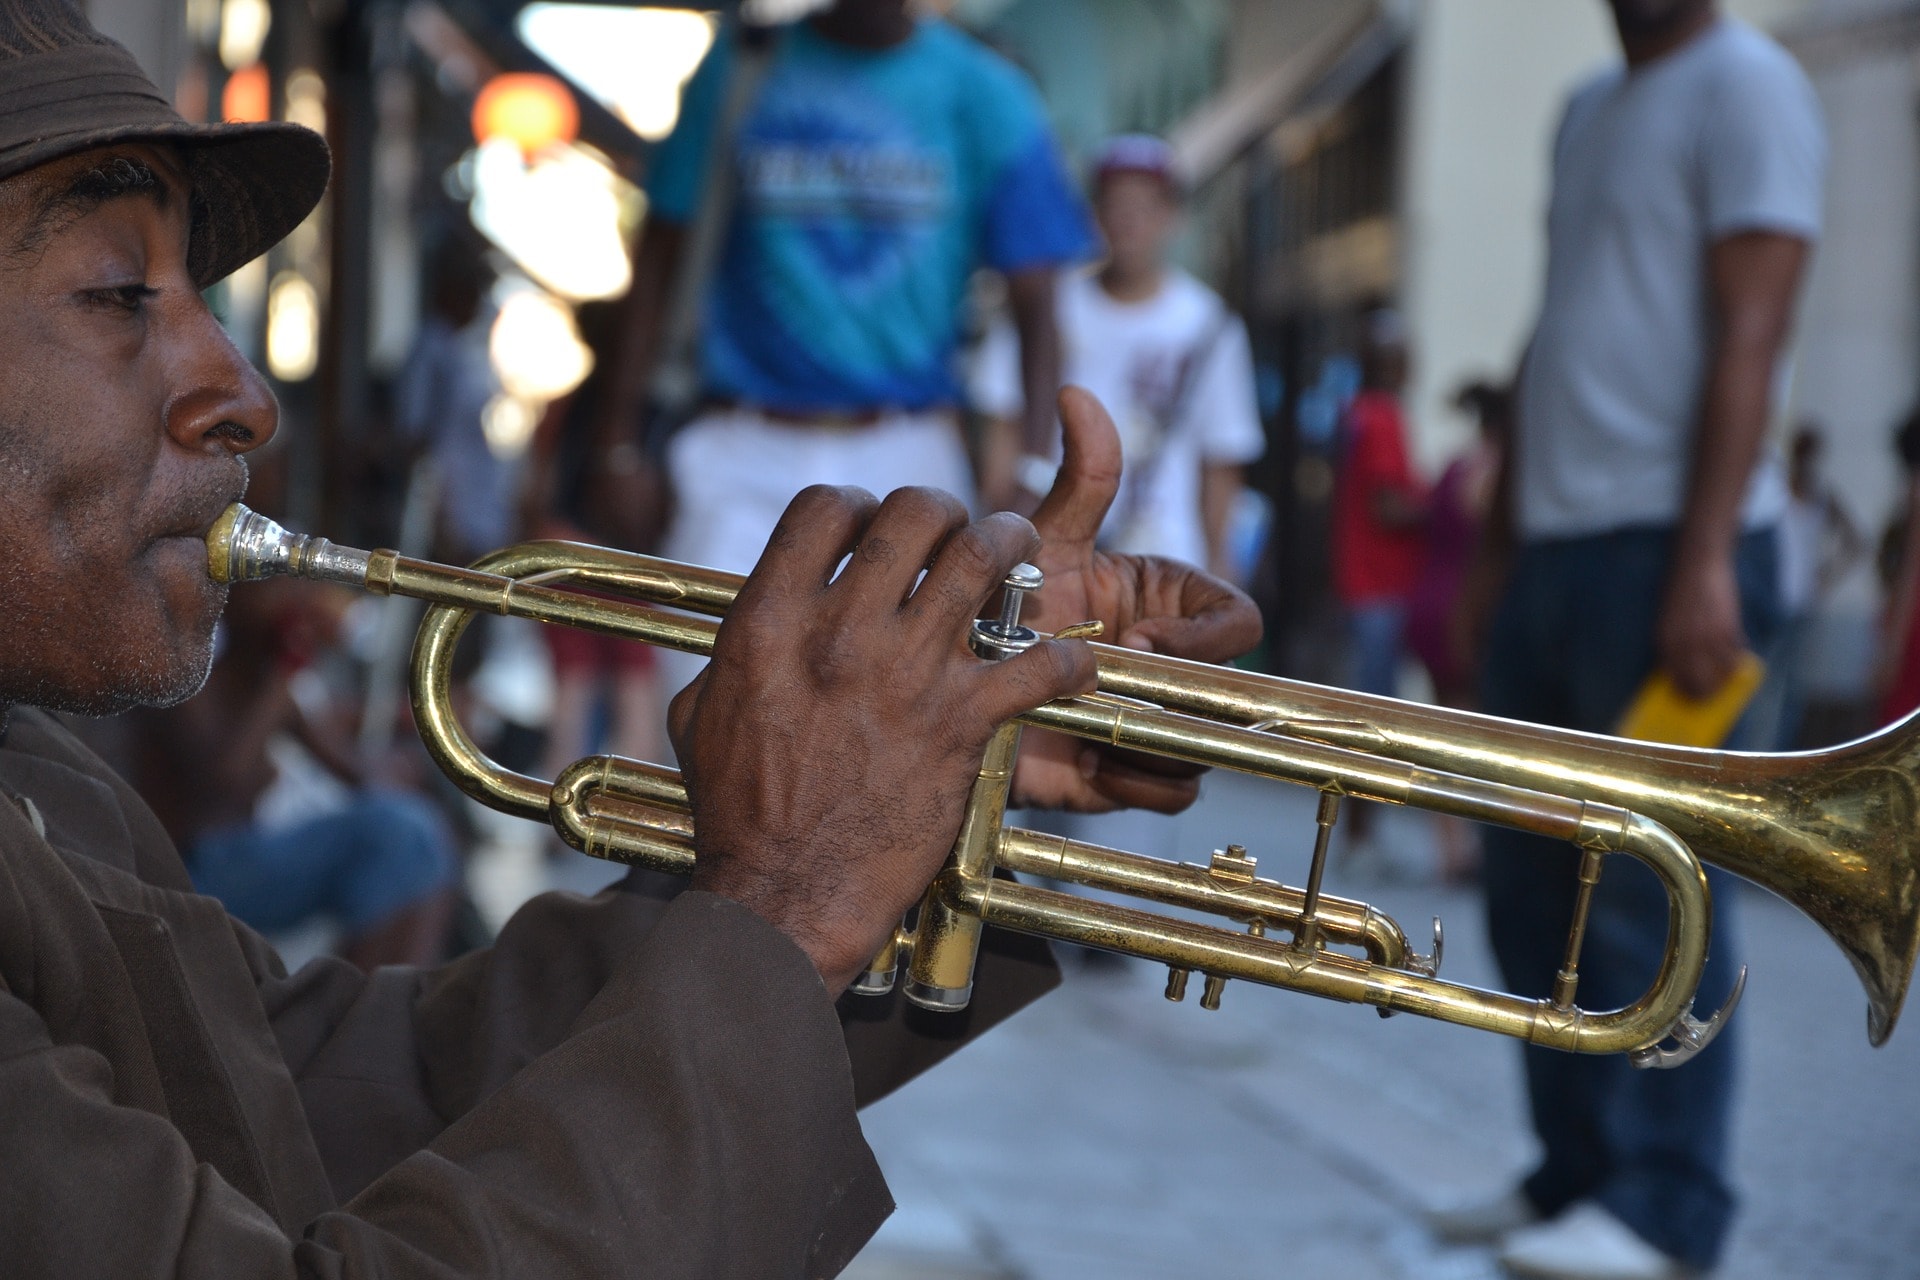 local man playing instrument in cuba